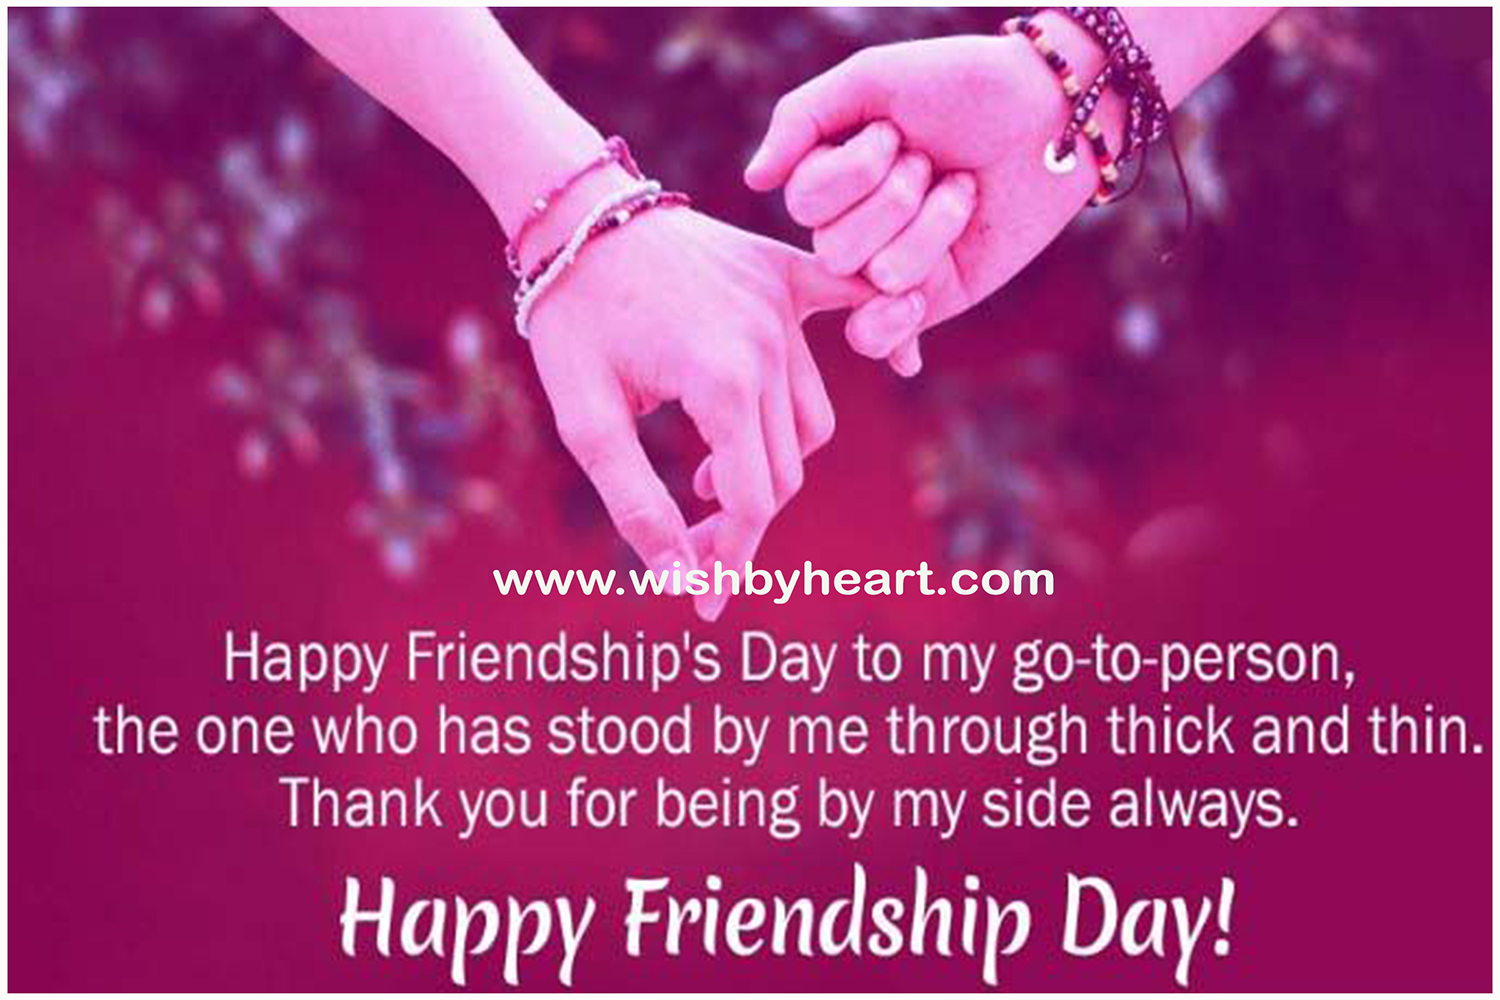 Happy Friendship Day Quotes 2021 Friends Quotes Wishes Images And Greetings Wish By Heart